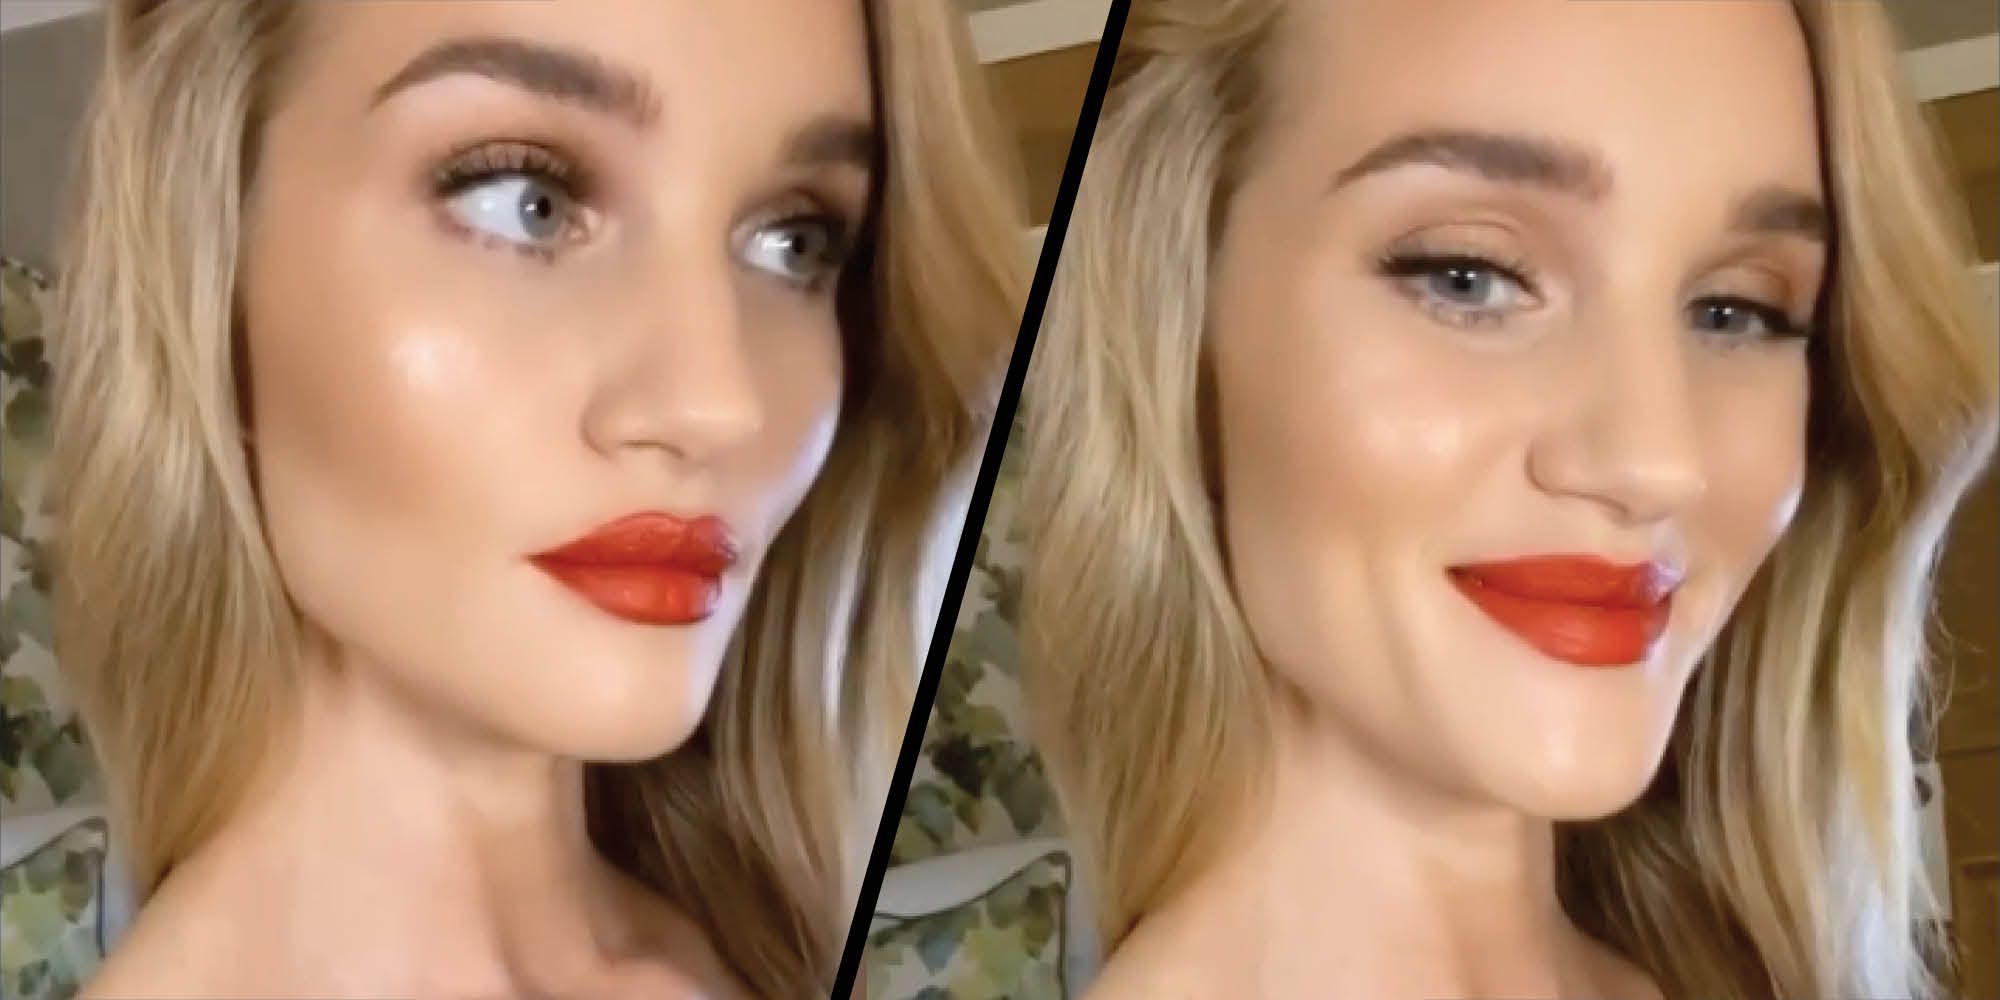 Rosie Huntington-Whiteley's Bazaar Awards make-up will be our go-to party season inspiration